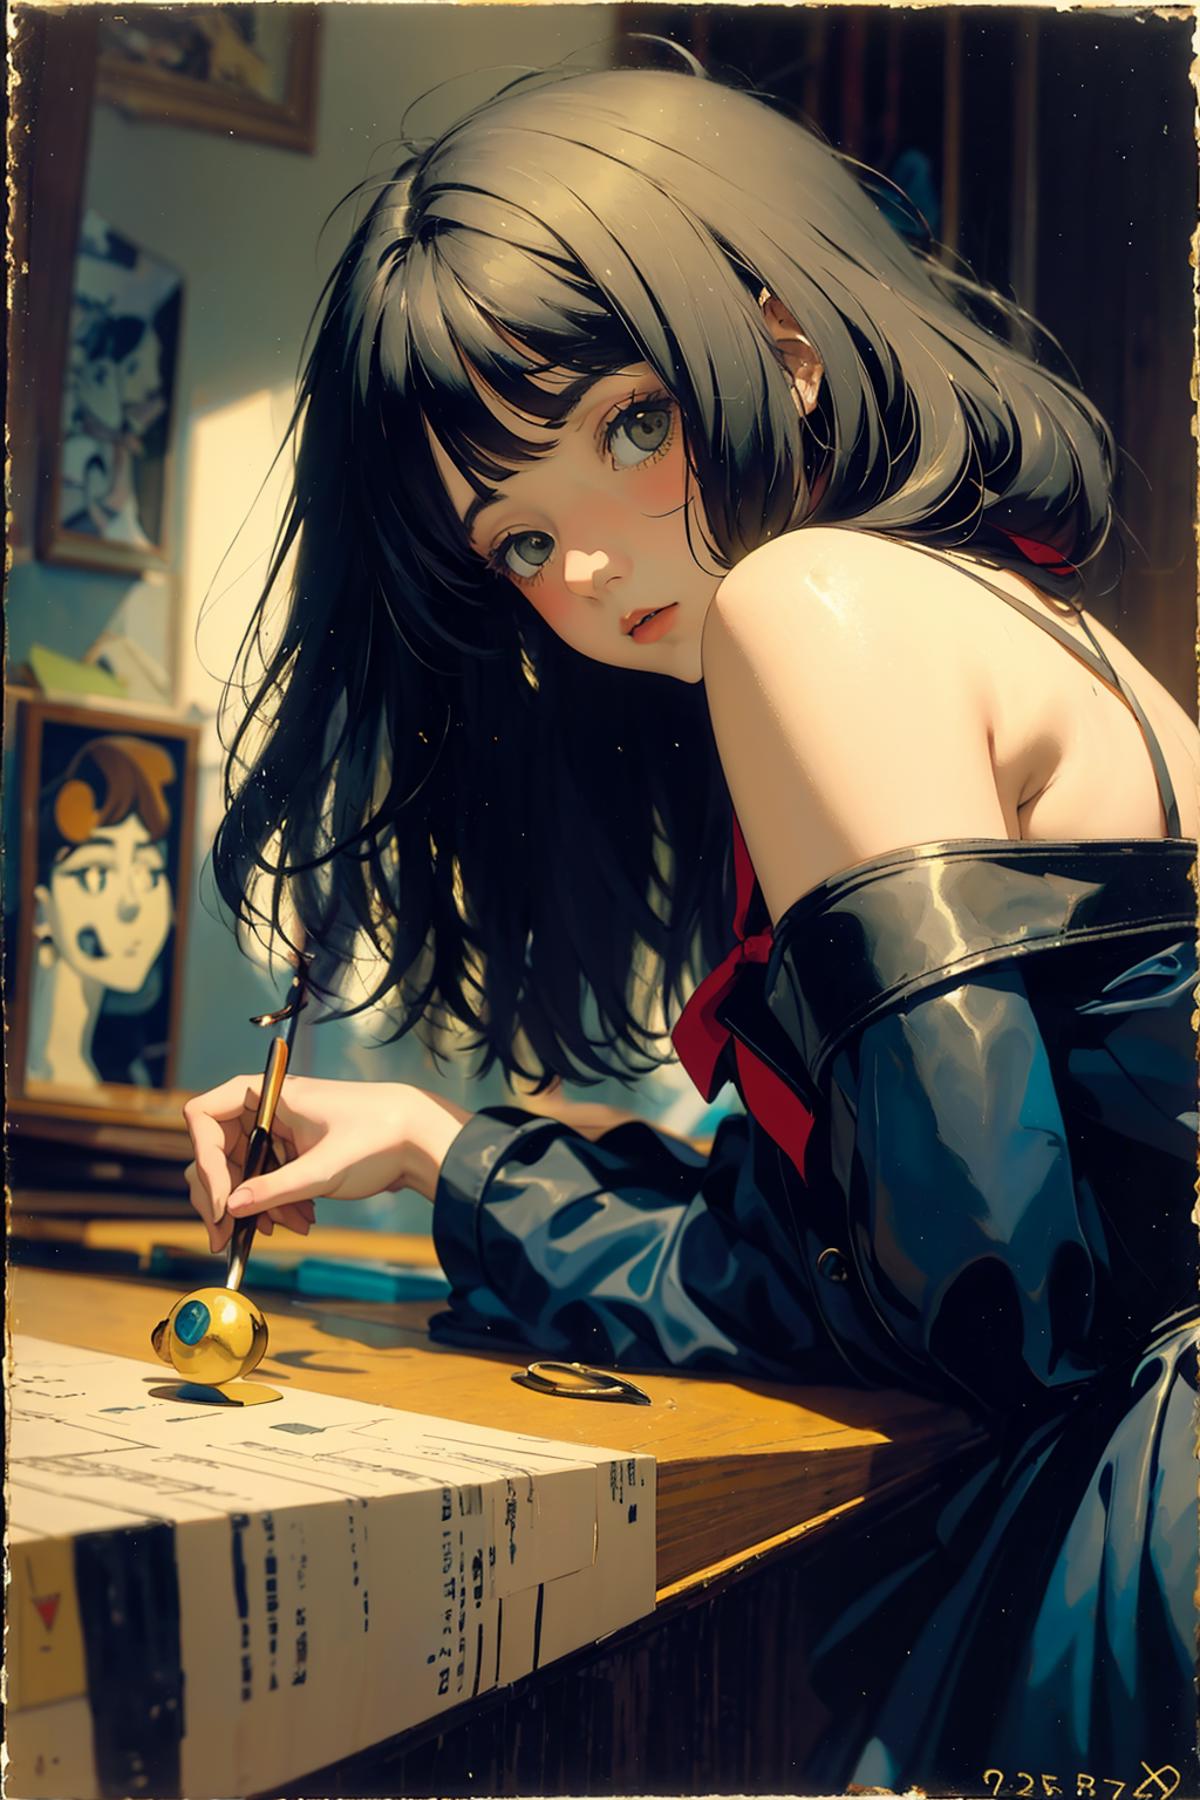 A young woman writing with a fountain pen at a wooden desk.